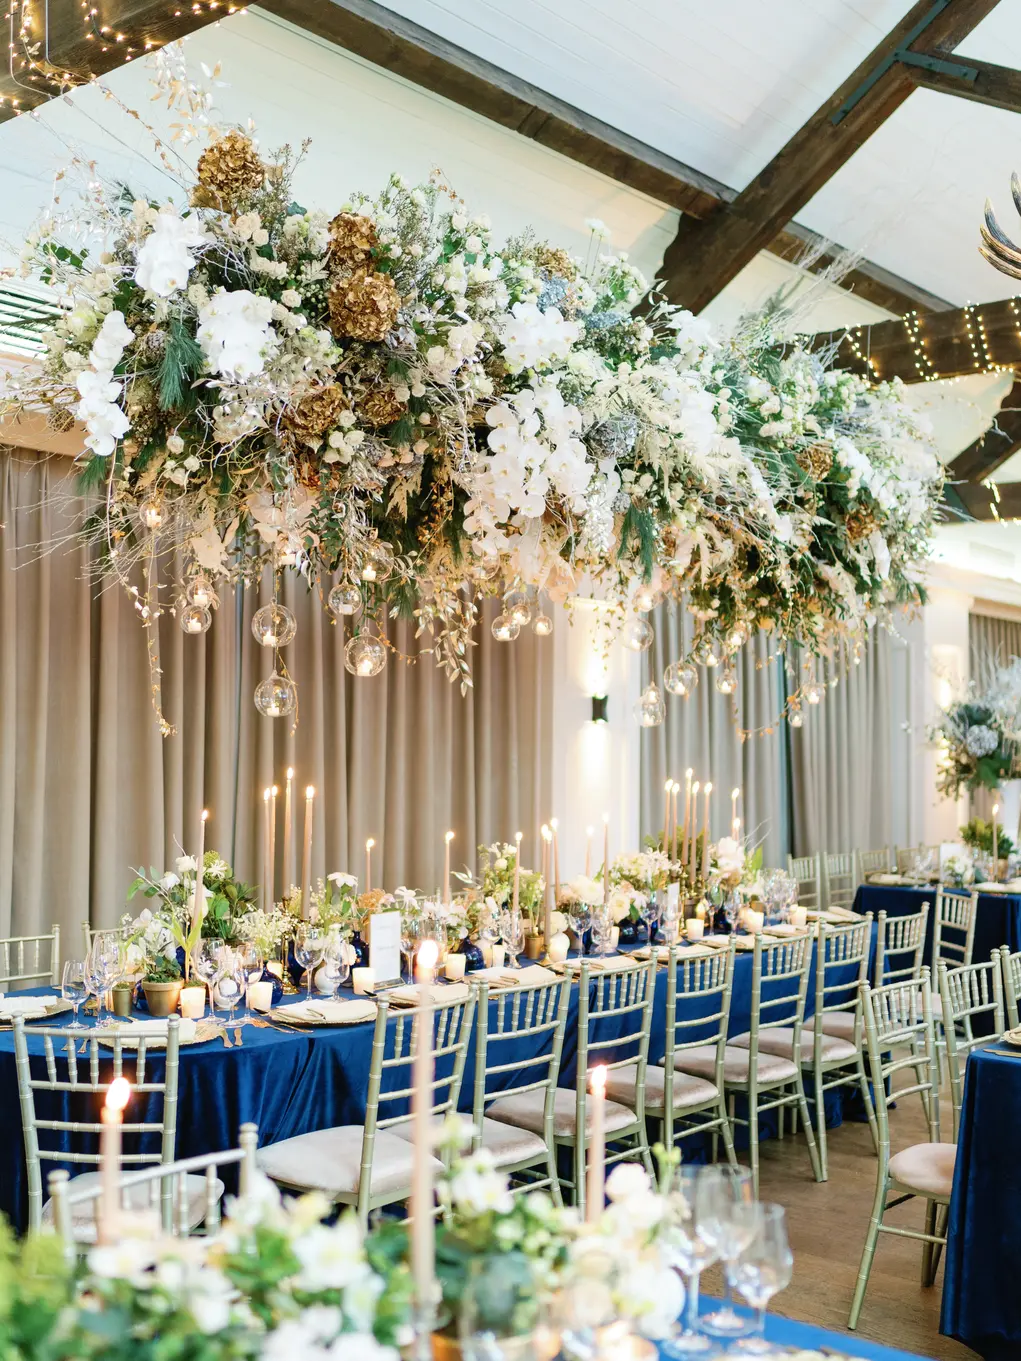 A long table decorated with white flowers and with a huge ceiling flower display